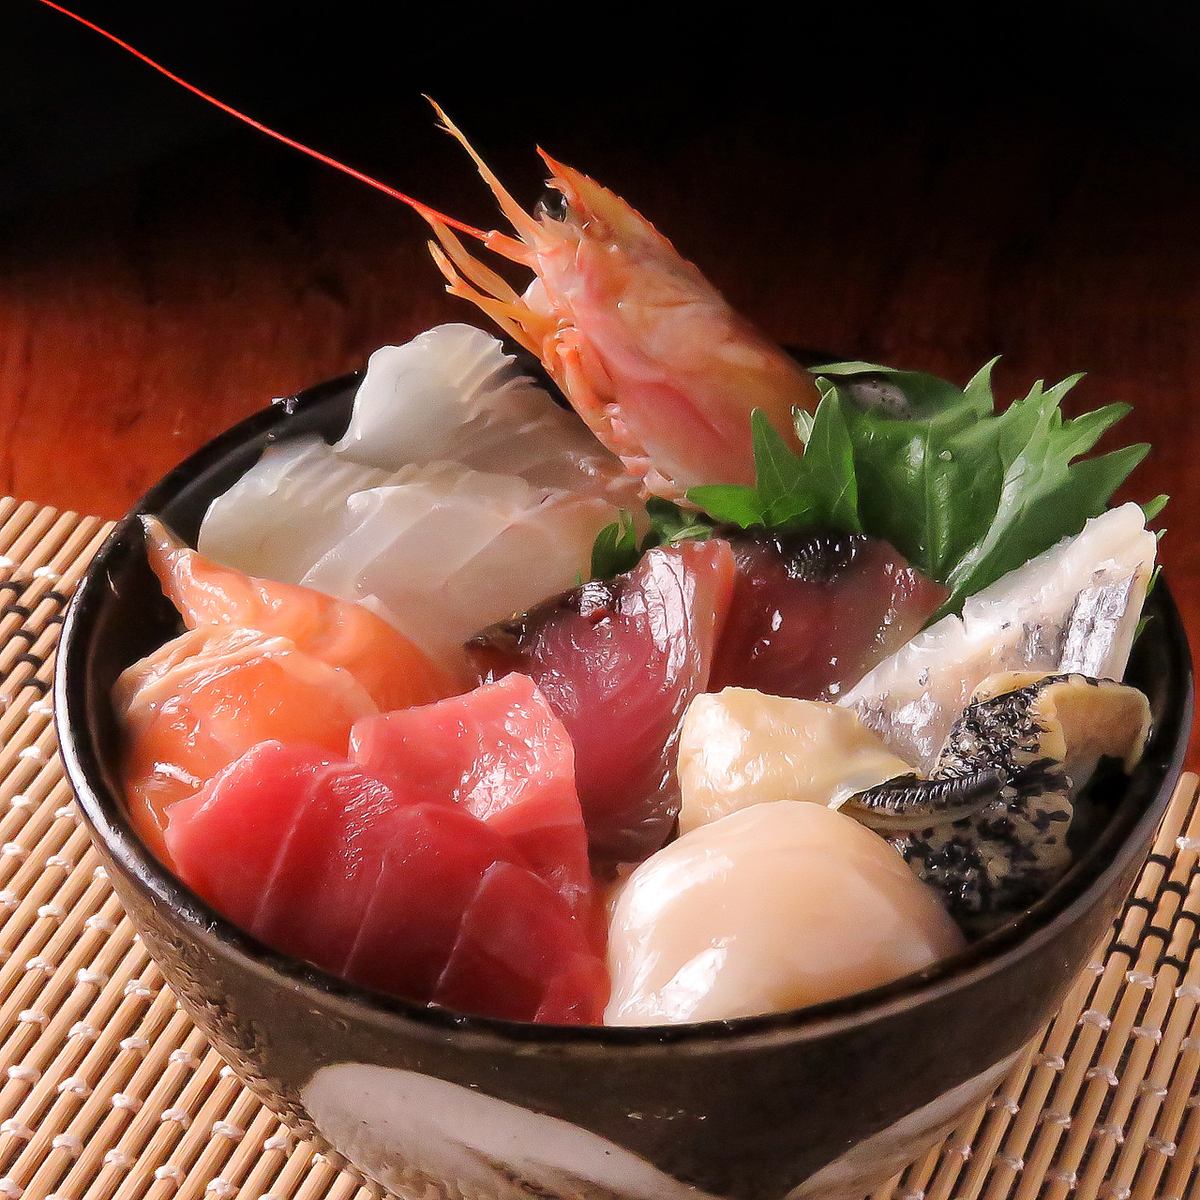 Enjoy not only sashimi that allows you to enjoy the taste of the ingredients, but also grilling and steaming.